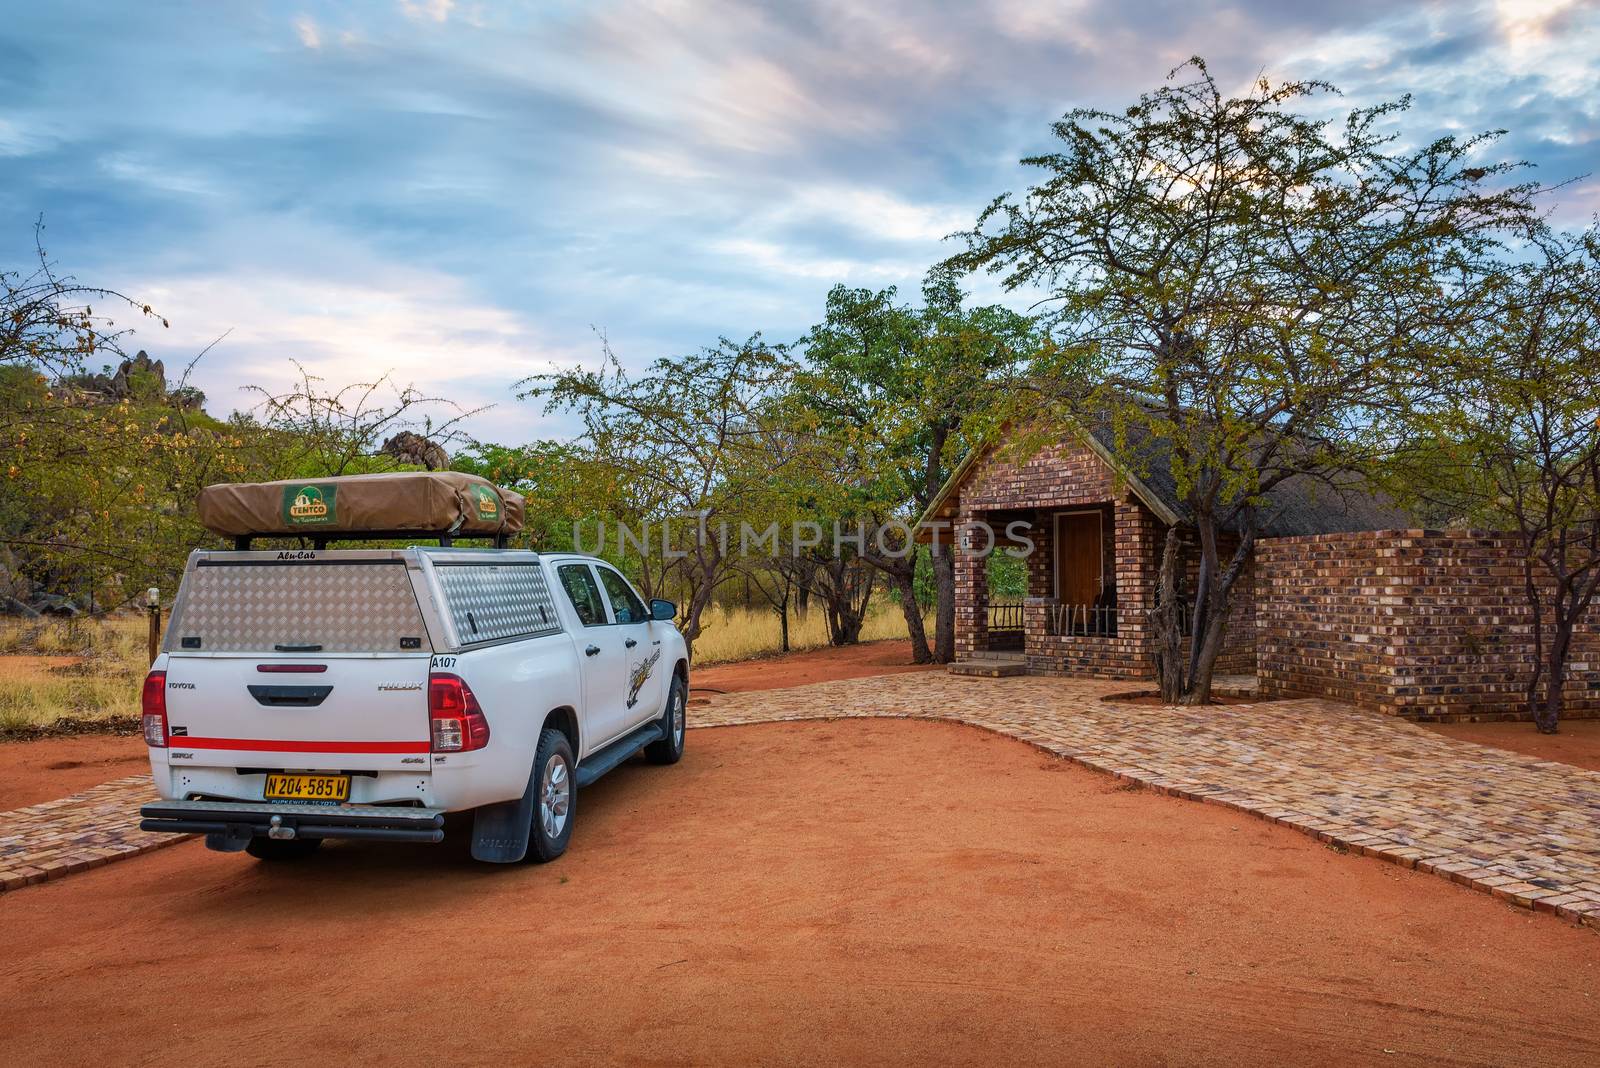 Kamanjab, Namibia - March 30, 2019 : Typical 4x4 rental car in Namibia equipped with camping gear and a roof tent parks at the Kaoko Bush Lodge located near the Galton Gate of Etosha National Park.